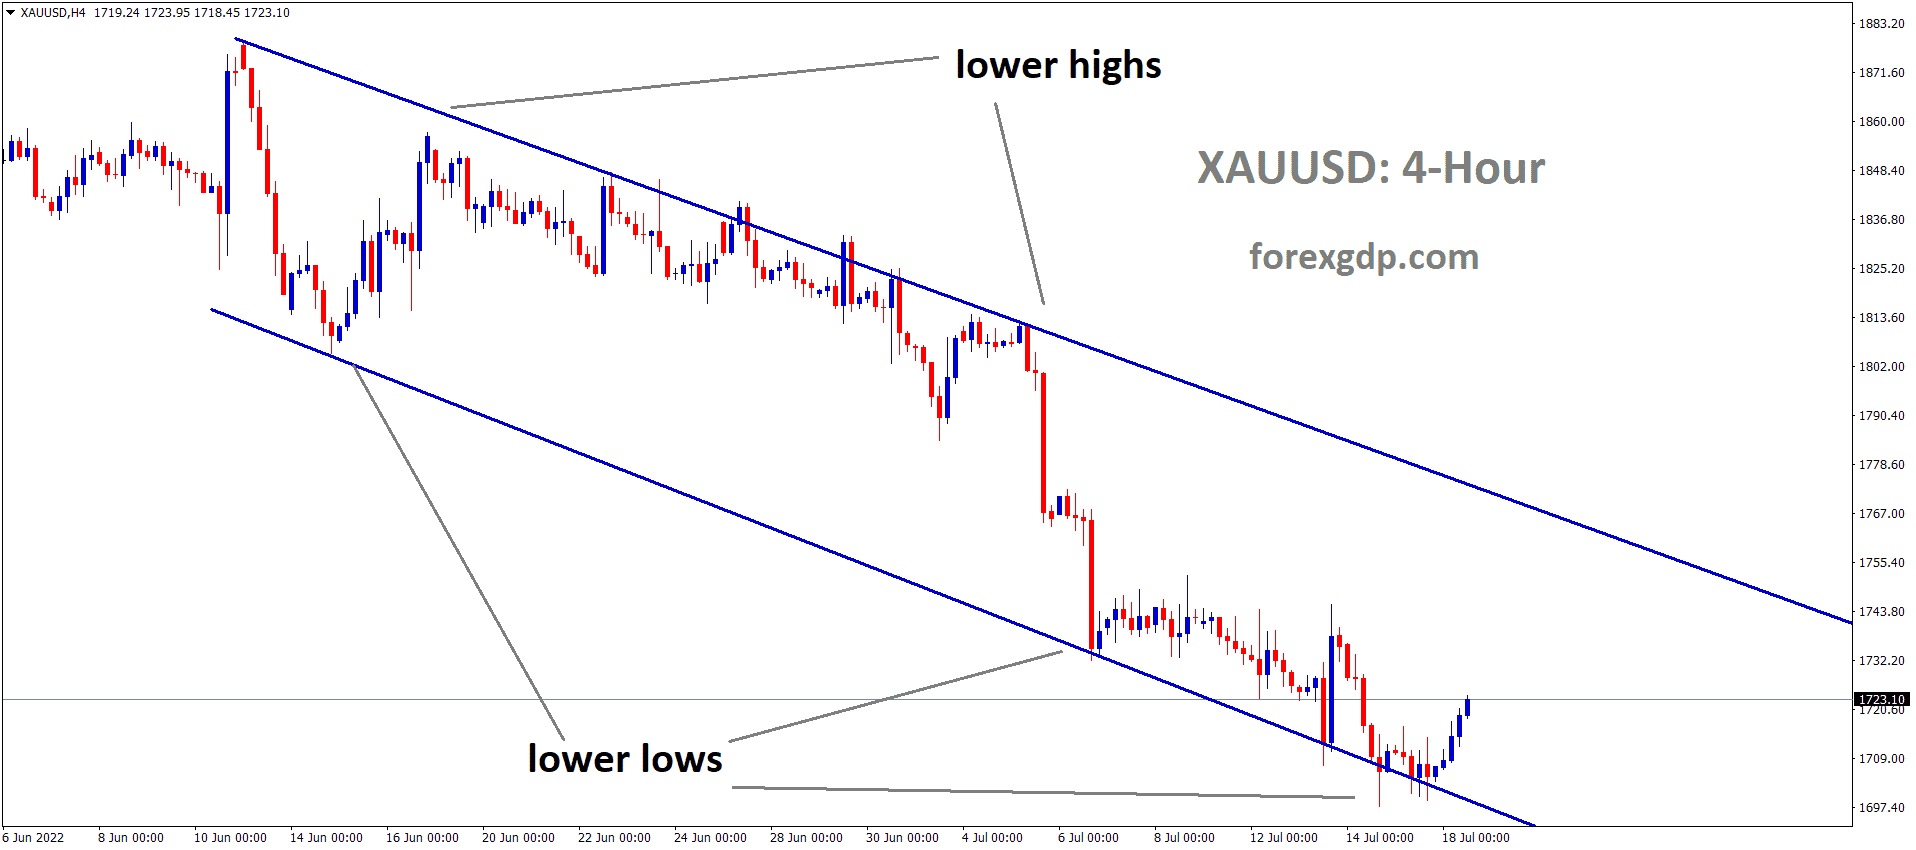 XAUUSD Gold price is moving in the Descending channel and the market has rebounded from the lower low area of the channel 1